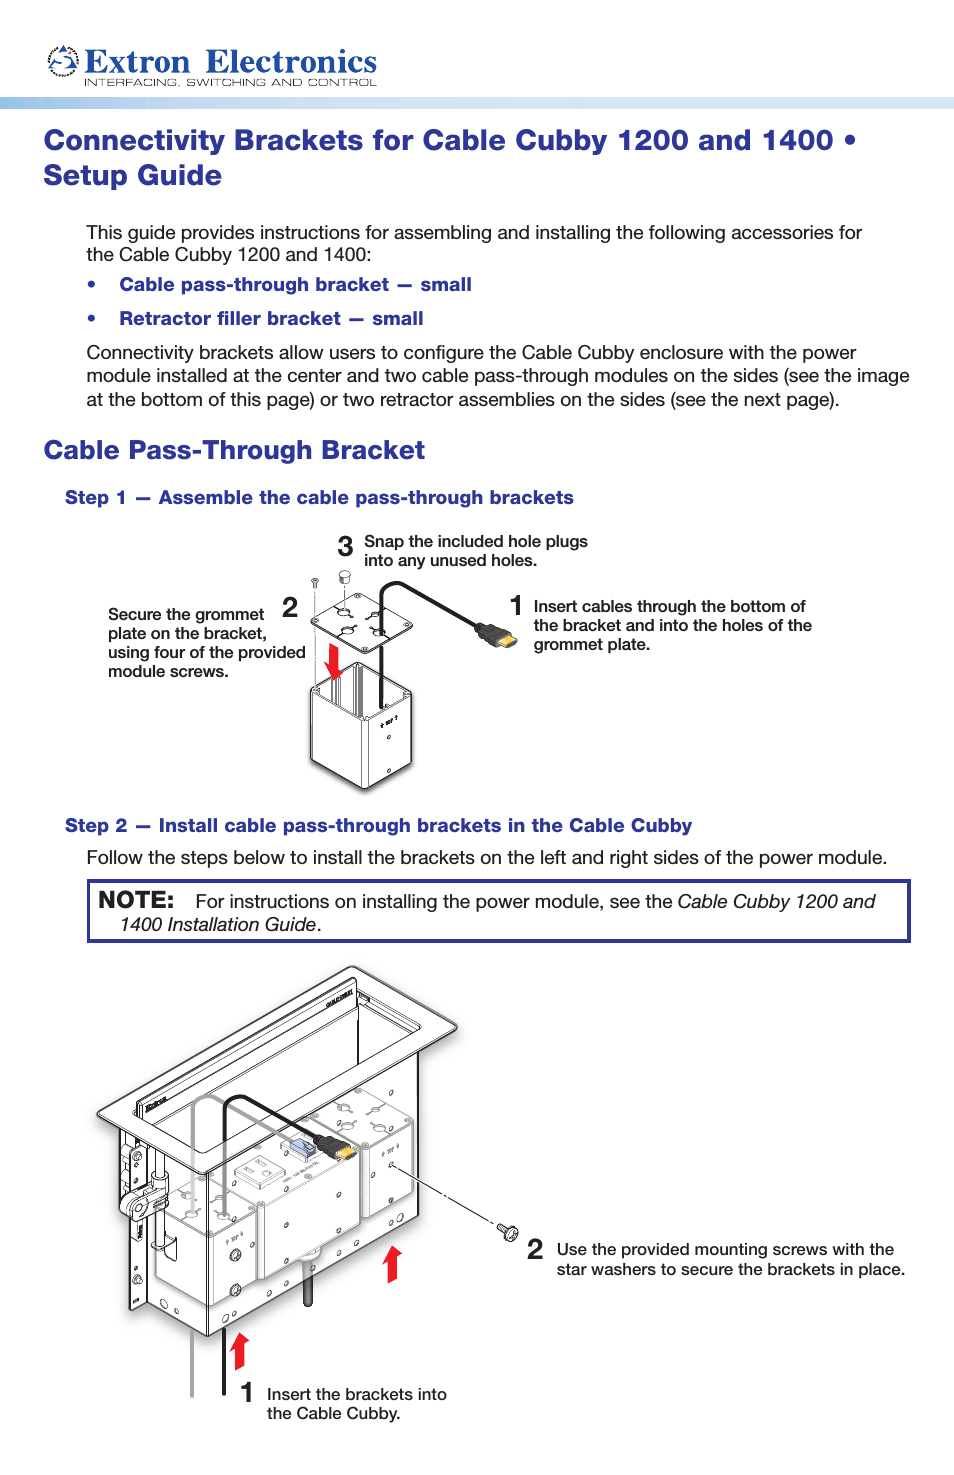 Cable Cubby 1400 Connectivity Brackets